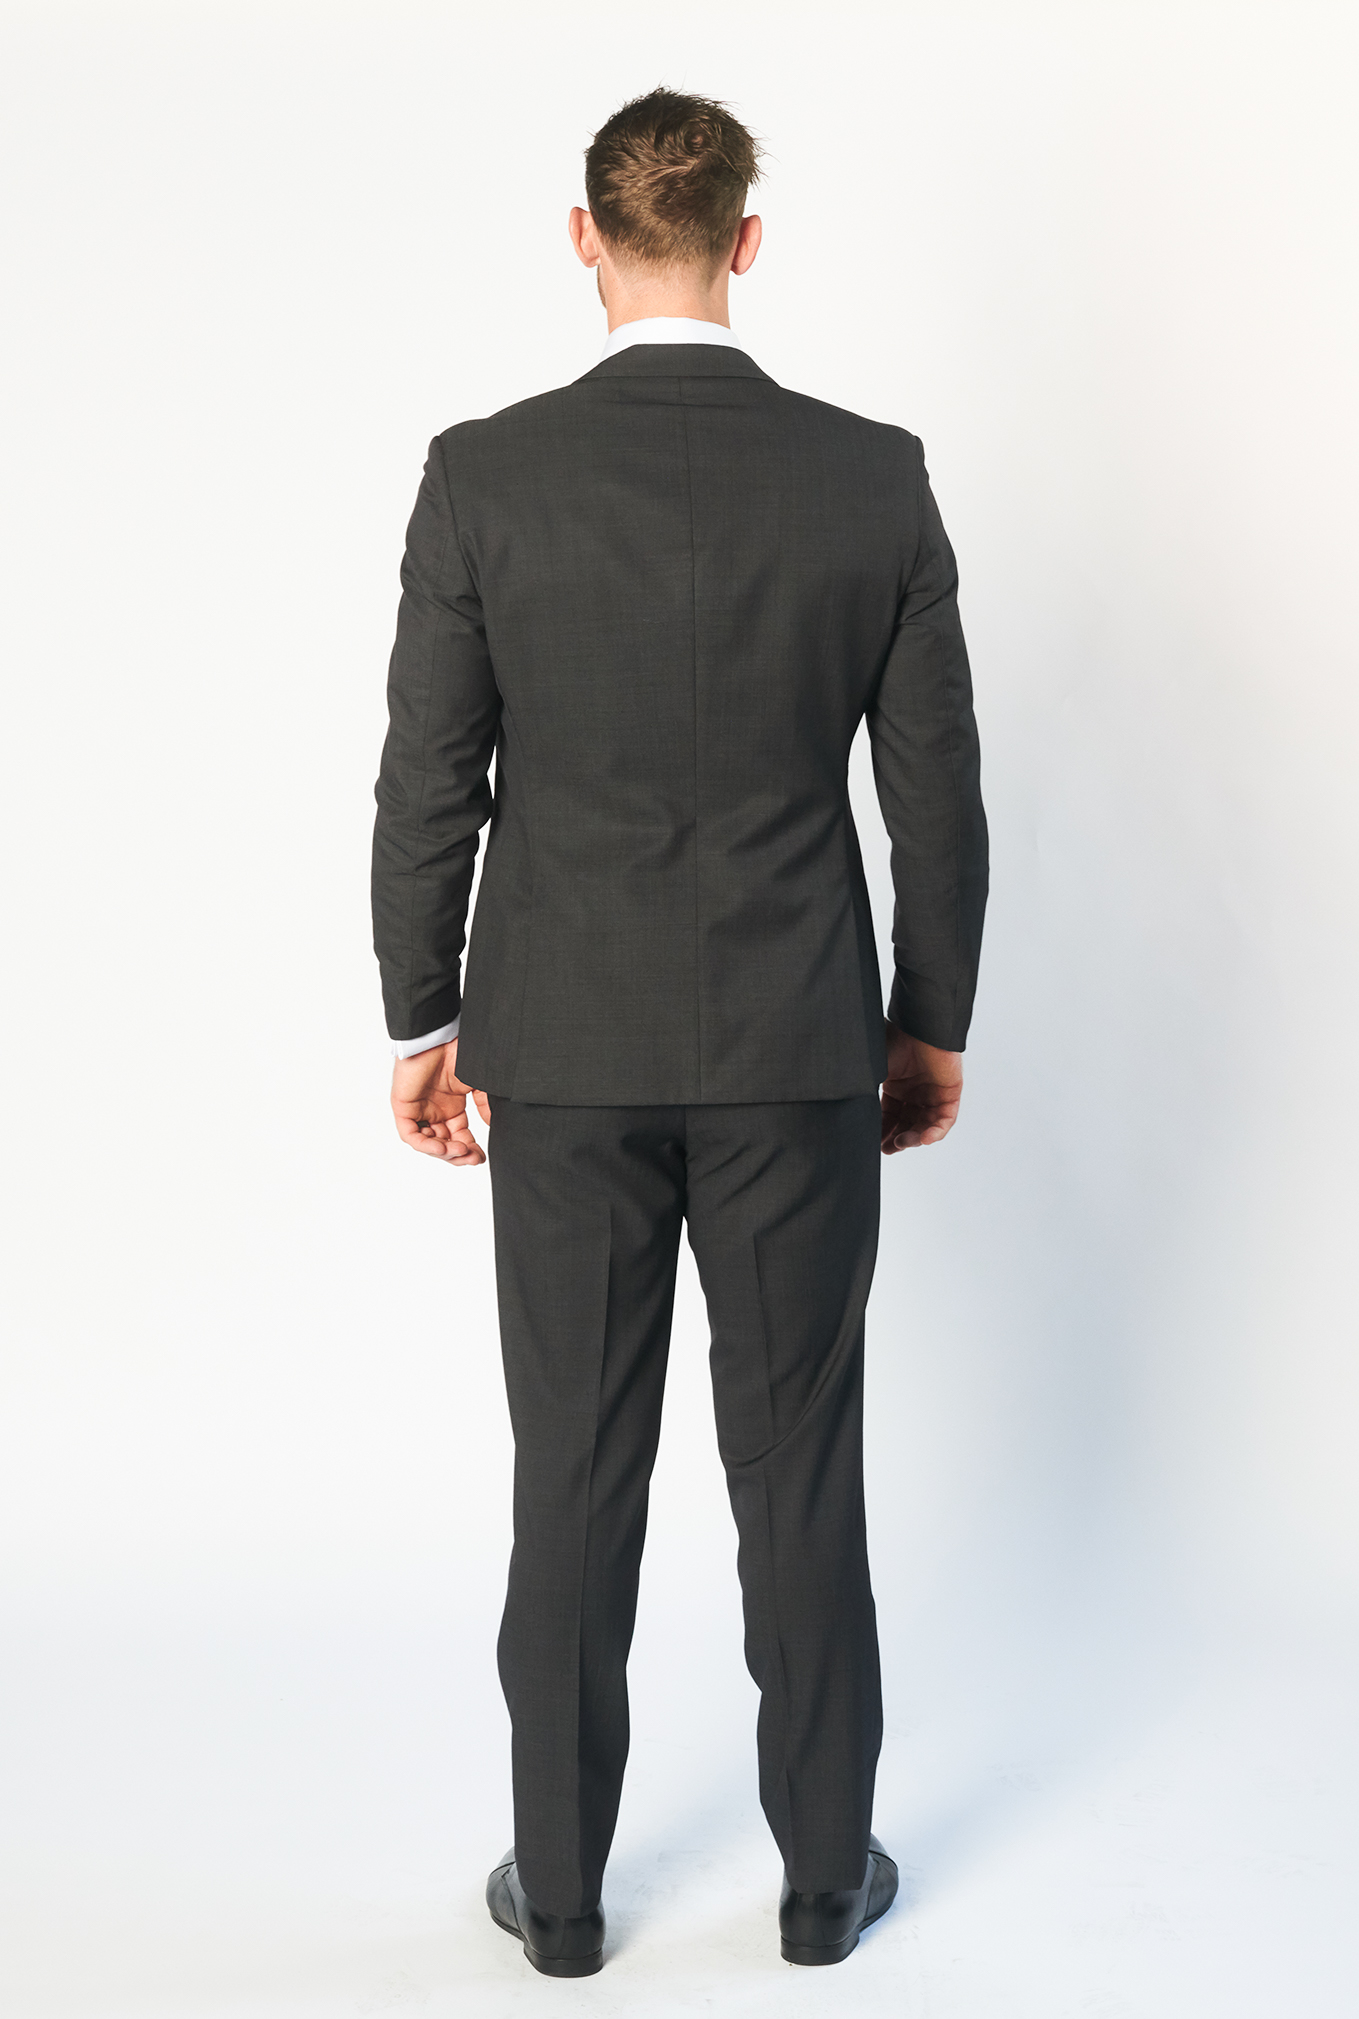 dark grey and pants for hire or sale brittons formal wear